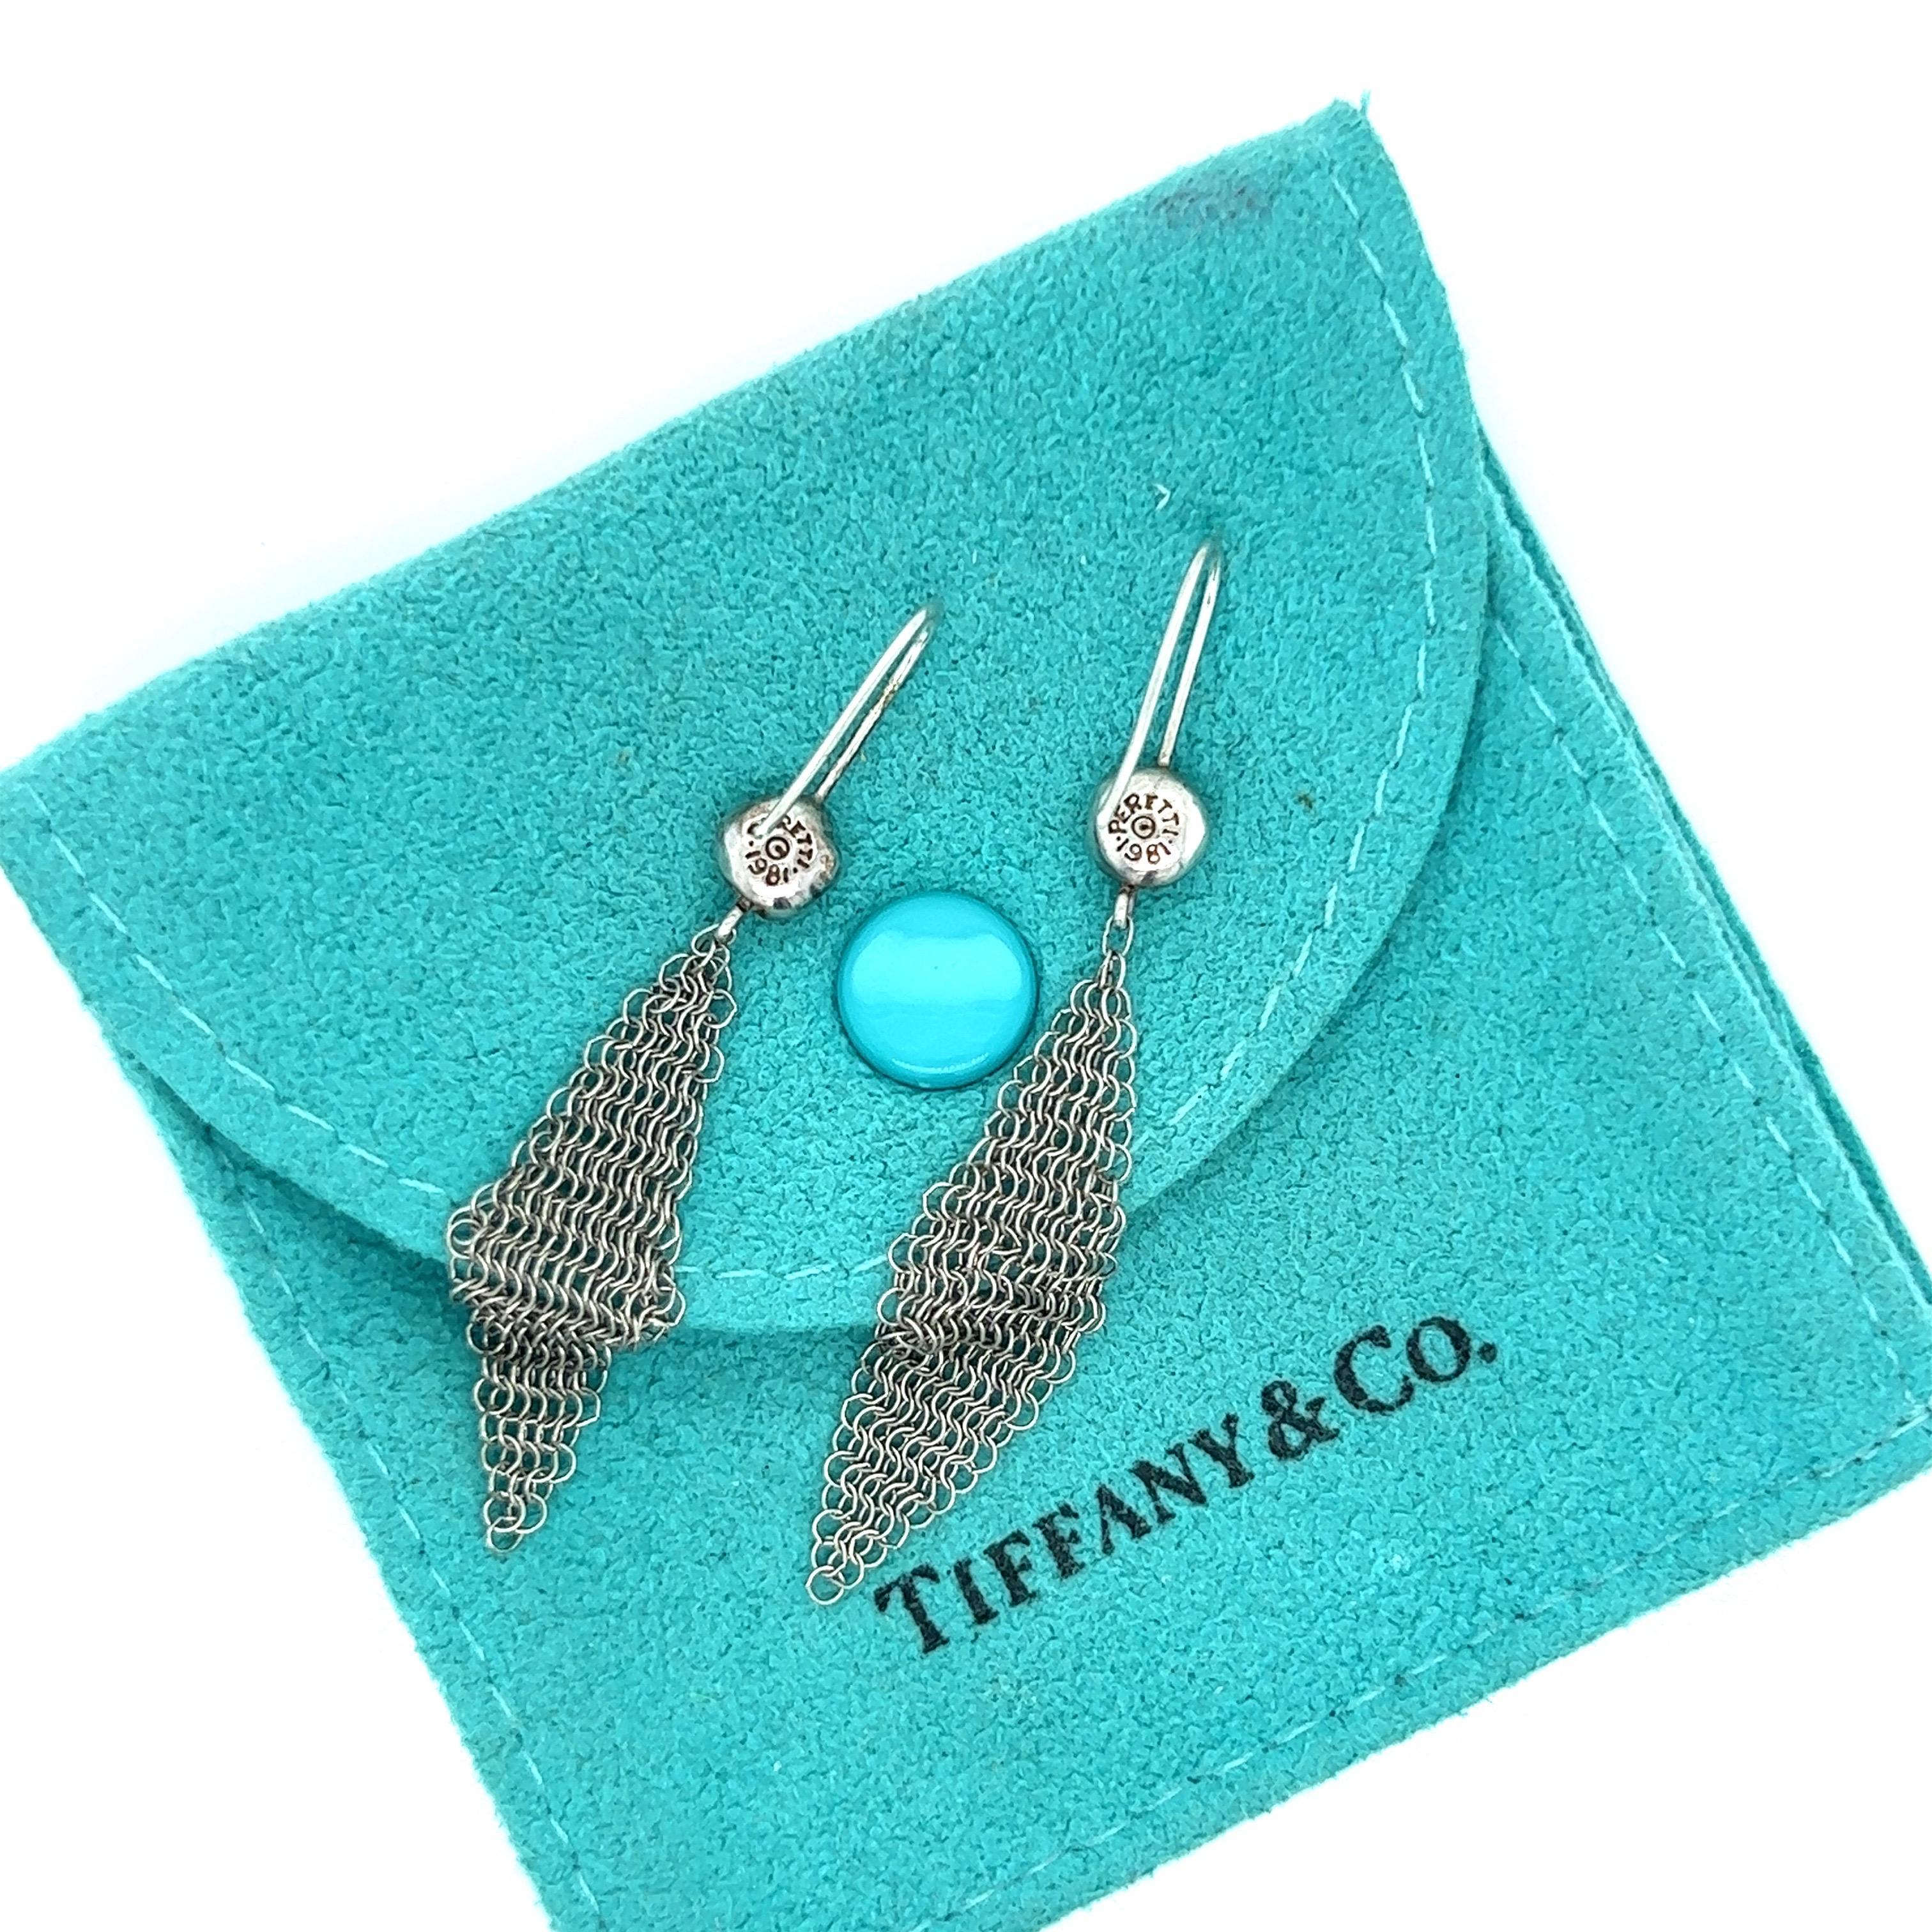 These Tiffany & Co. Elsa Peretti mesh dangle drop earrings are finely crafted in sterling silver. The earrings are 5 cm long from the hook fastening to the drop. 

Additional information:
Style : Dangle/Drop
Metal Type : Silver
Metal Weight :  2.22